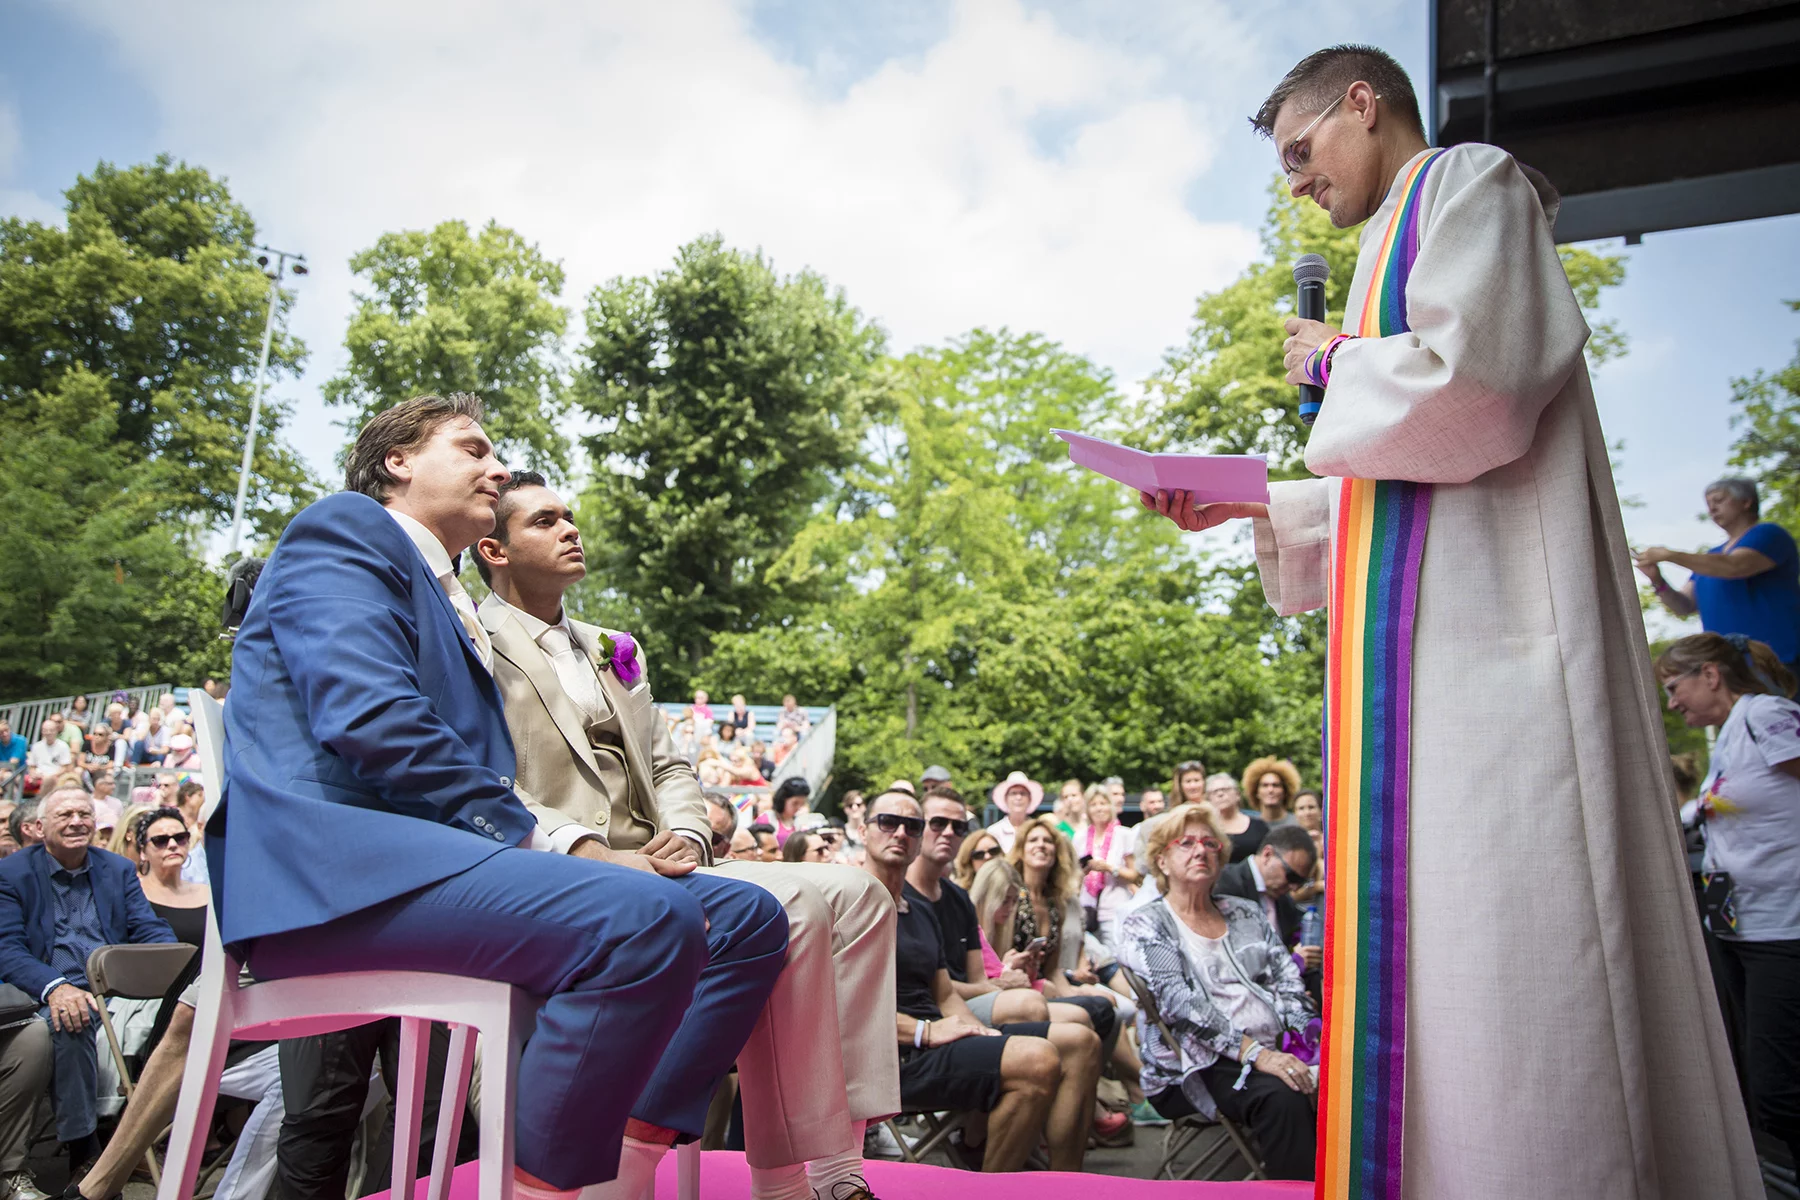 A gay couple at their wedding ceremony in the Vondelpark, Amsterdam